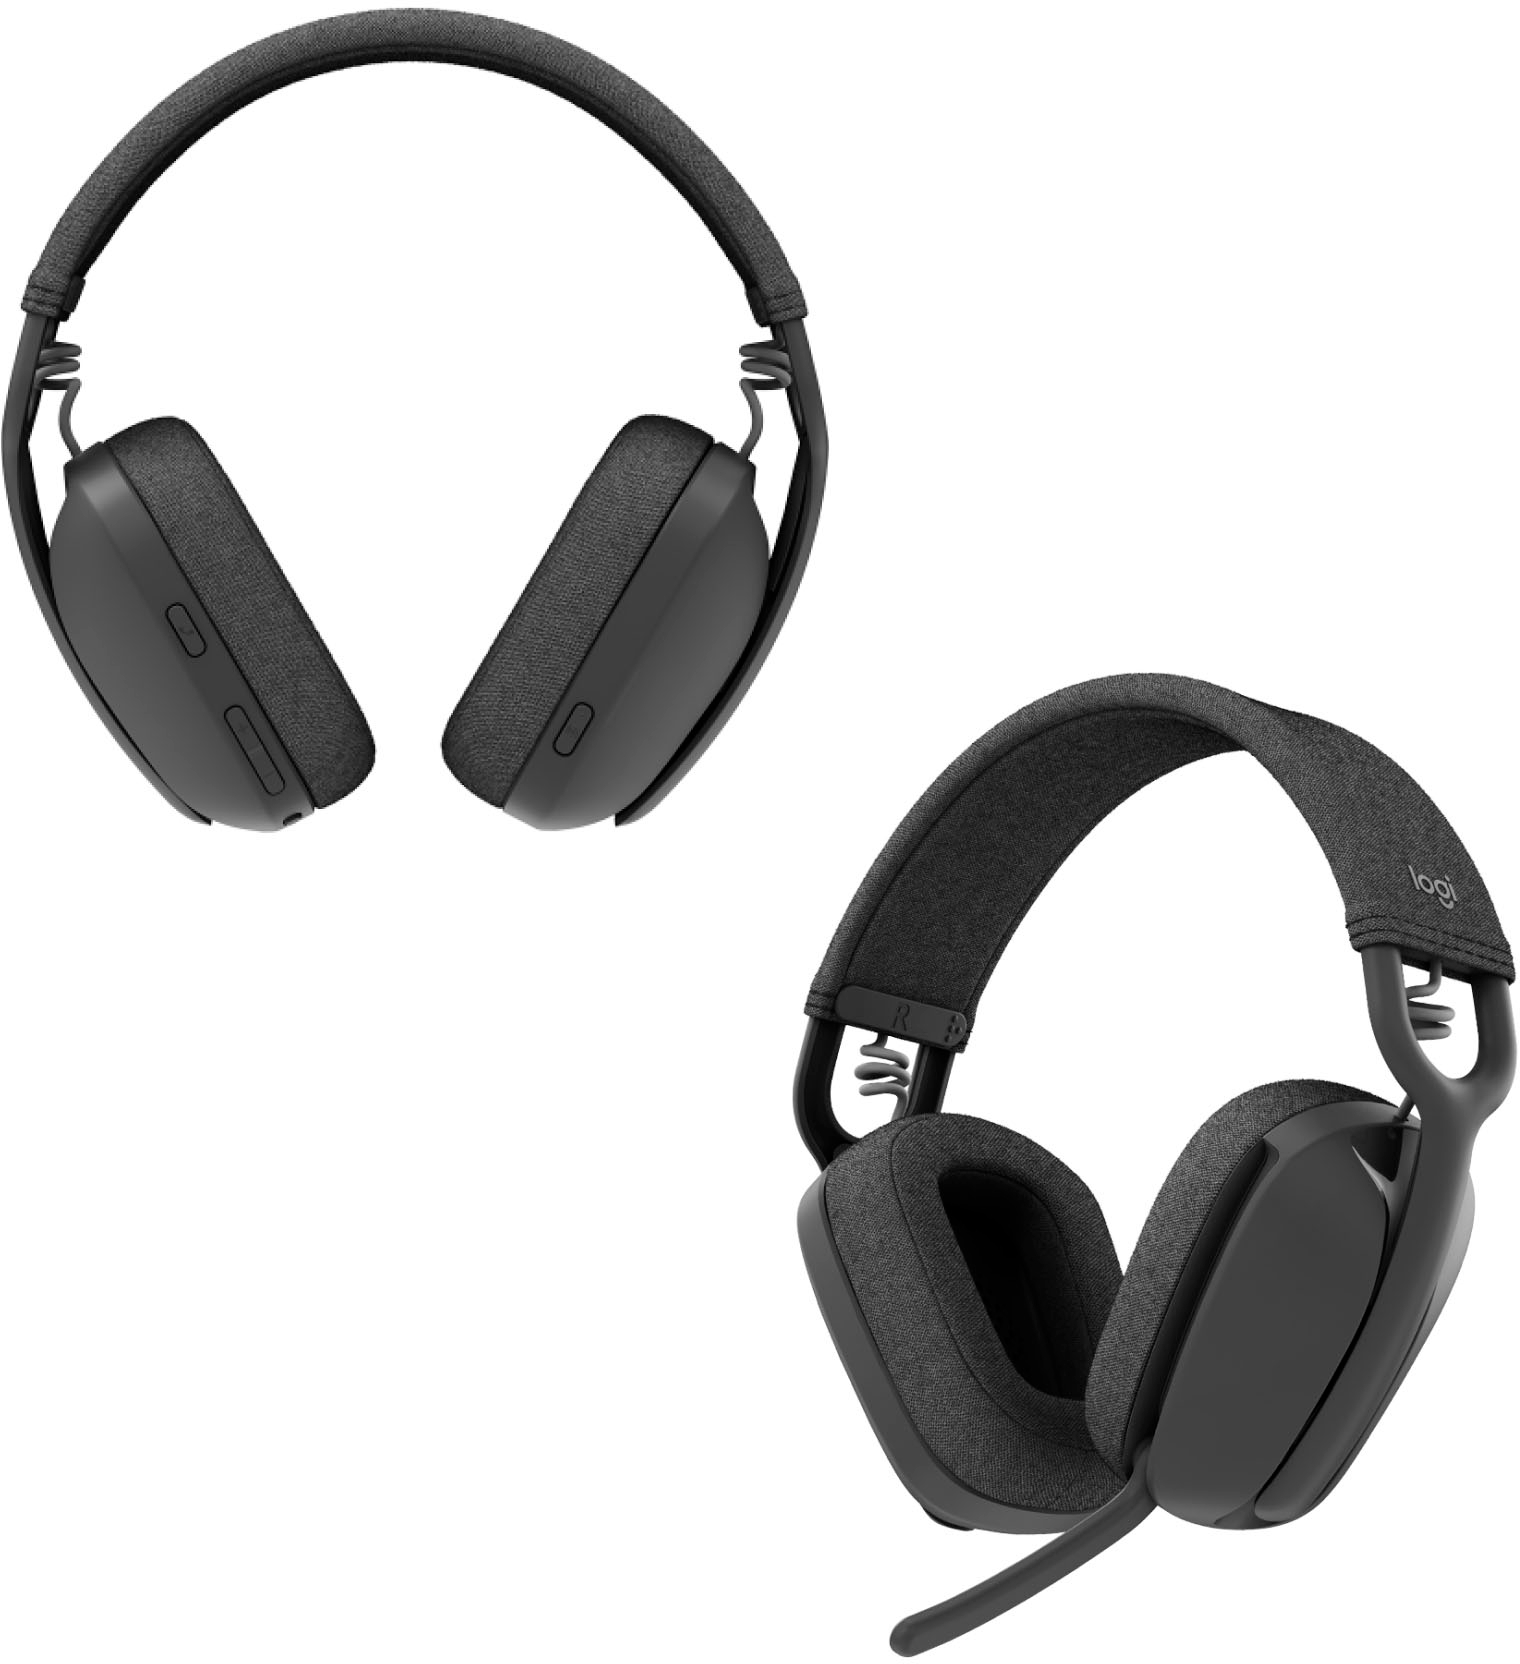 - Buy Headphones Graphite Best Microphone Over Bluetooth 100 Vibe with Logitech Zone Noise-Cancelling Ear 981-001256